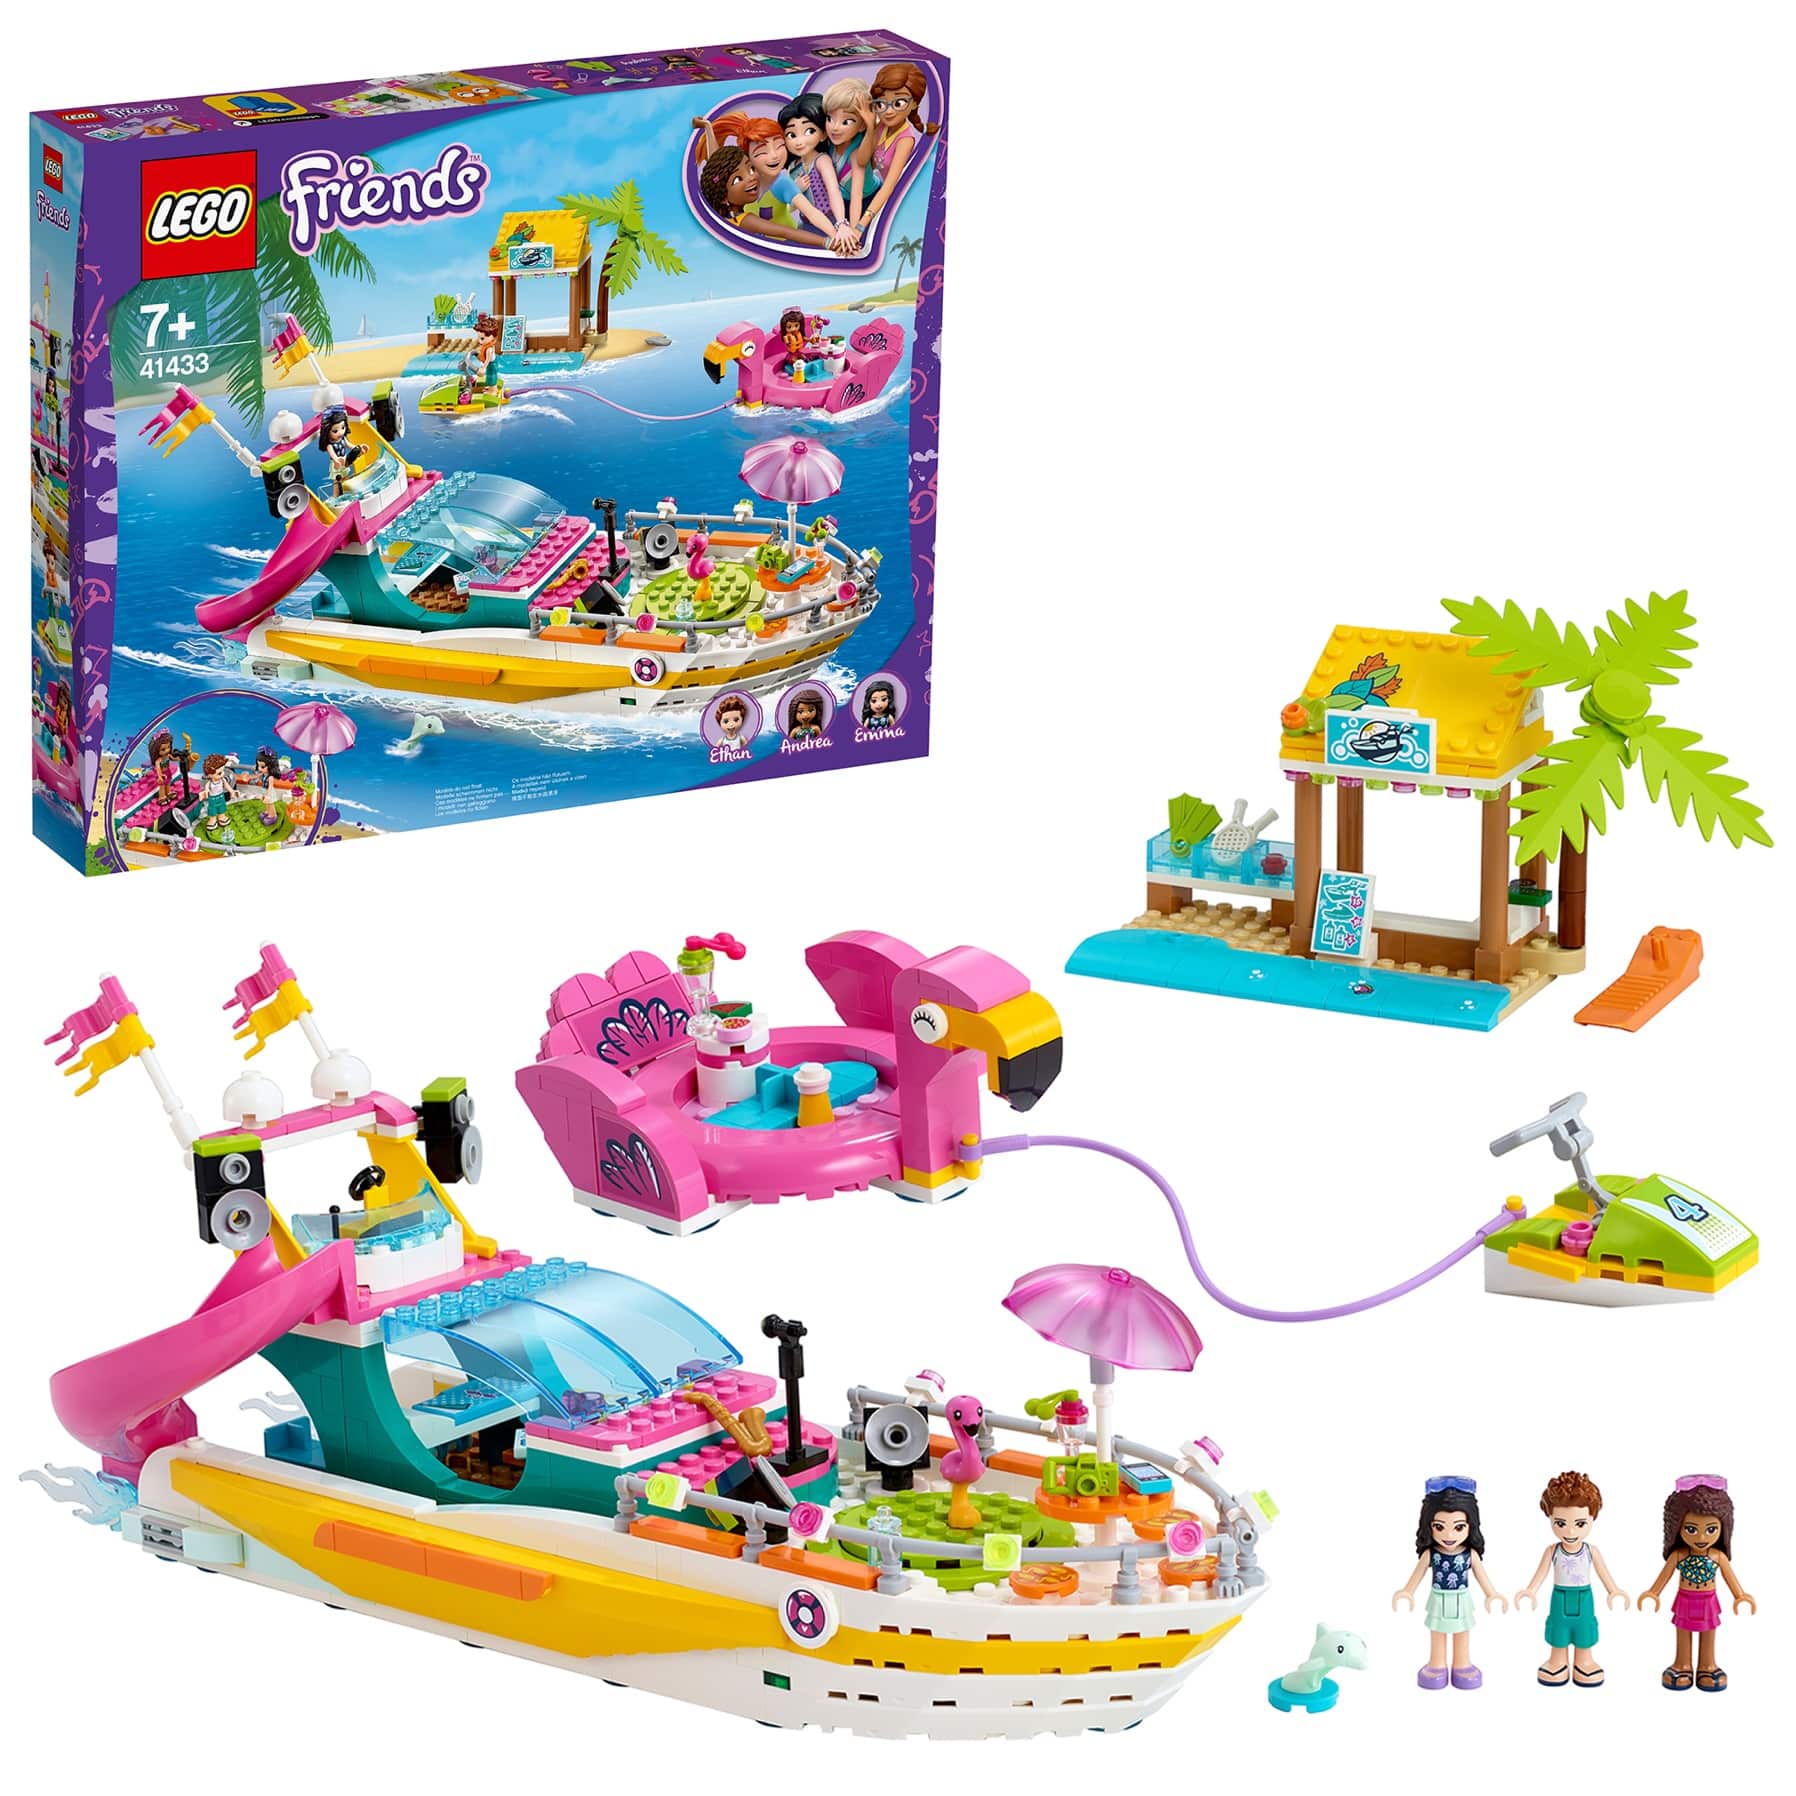 Buy LEGO Friends UAE|Toys Online & Dubai the in \'R\' (640 Party Us Boat Pieces)